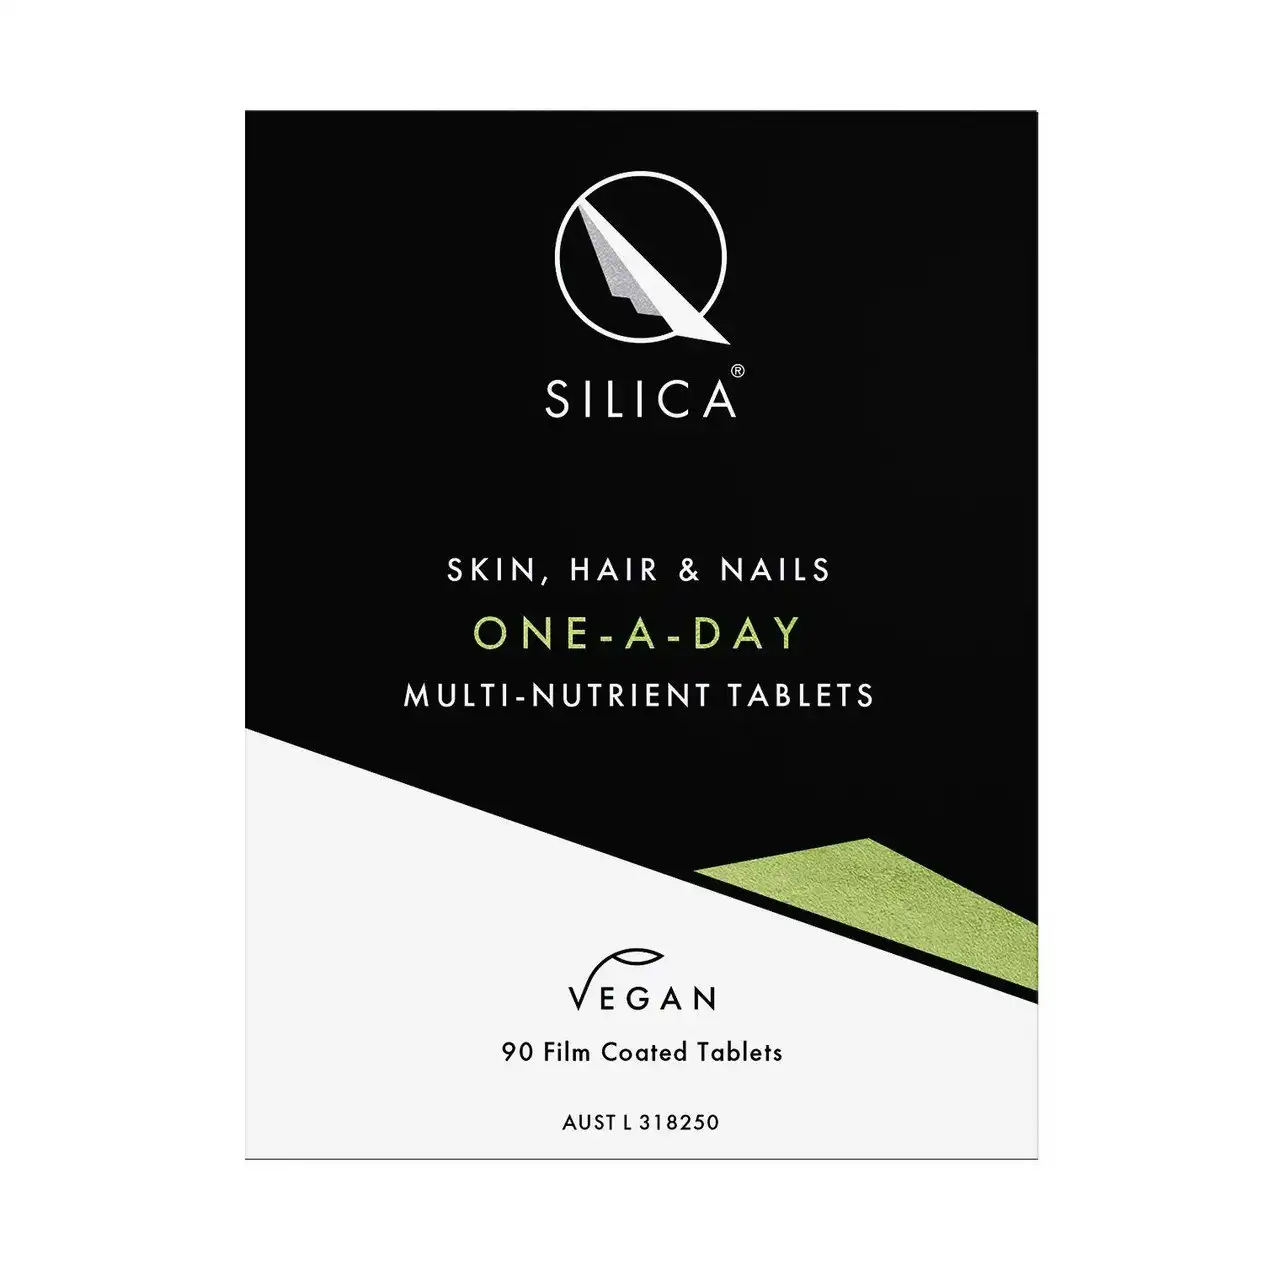 Q Silica Skin, Hair & Nails One-A-Day Multi-Nutrient Tablets 90